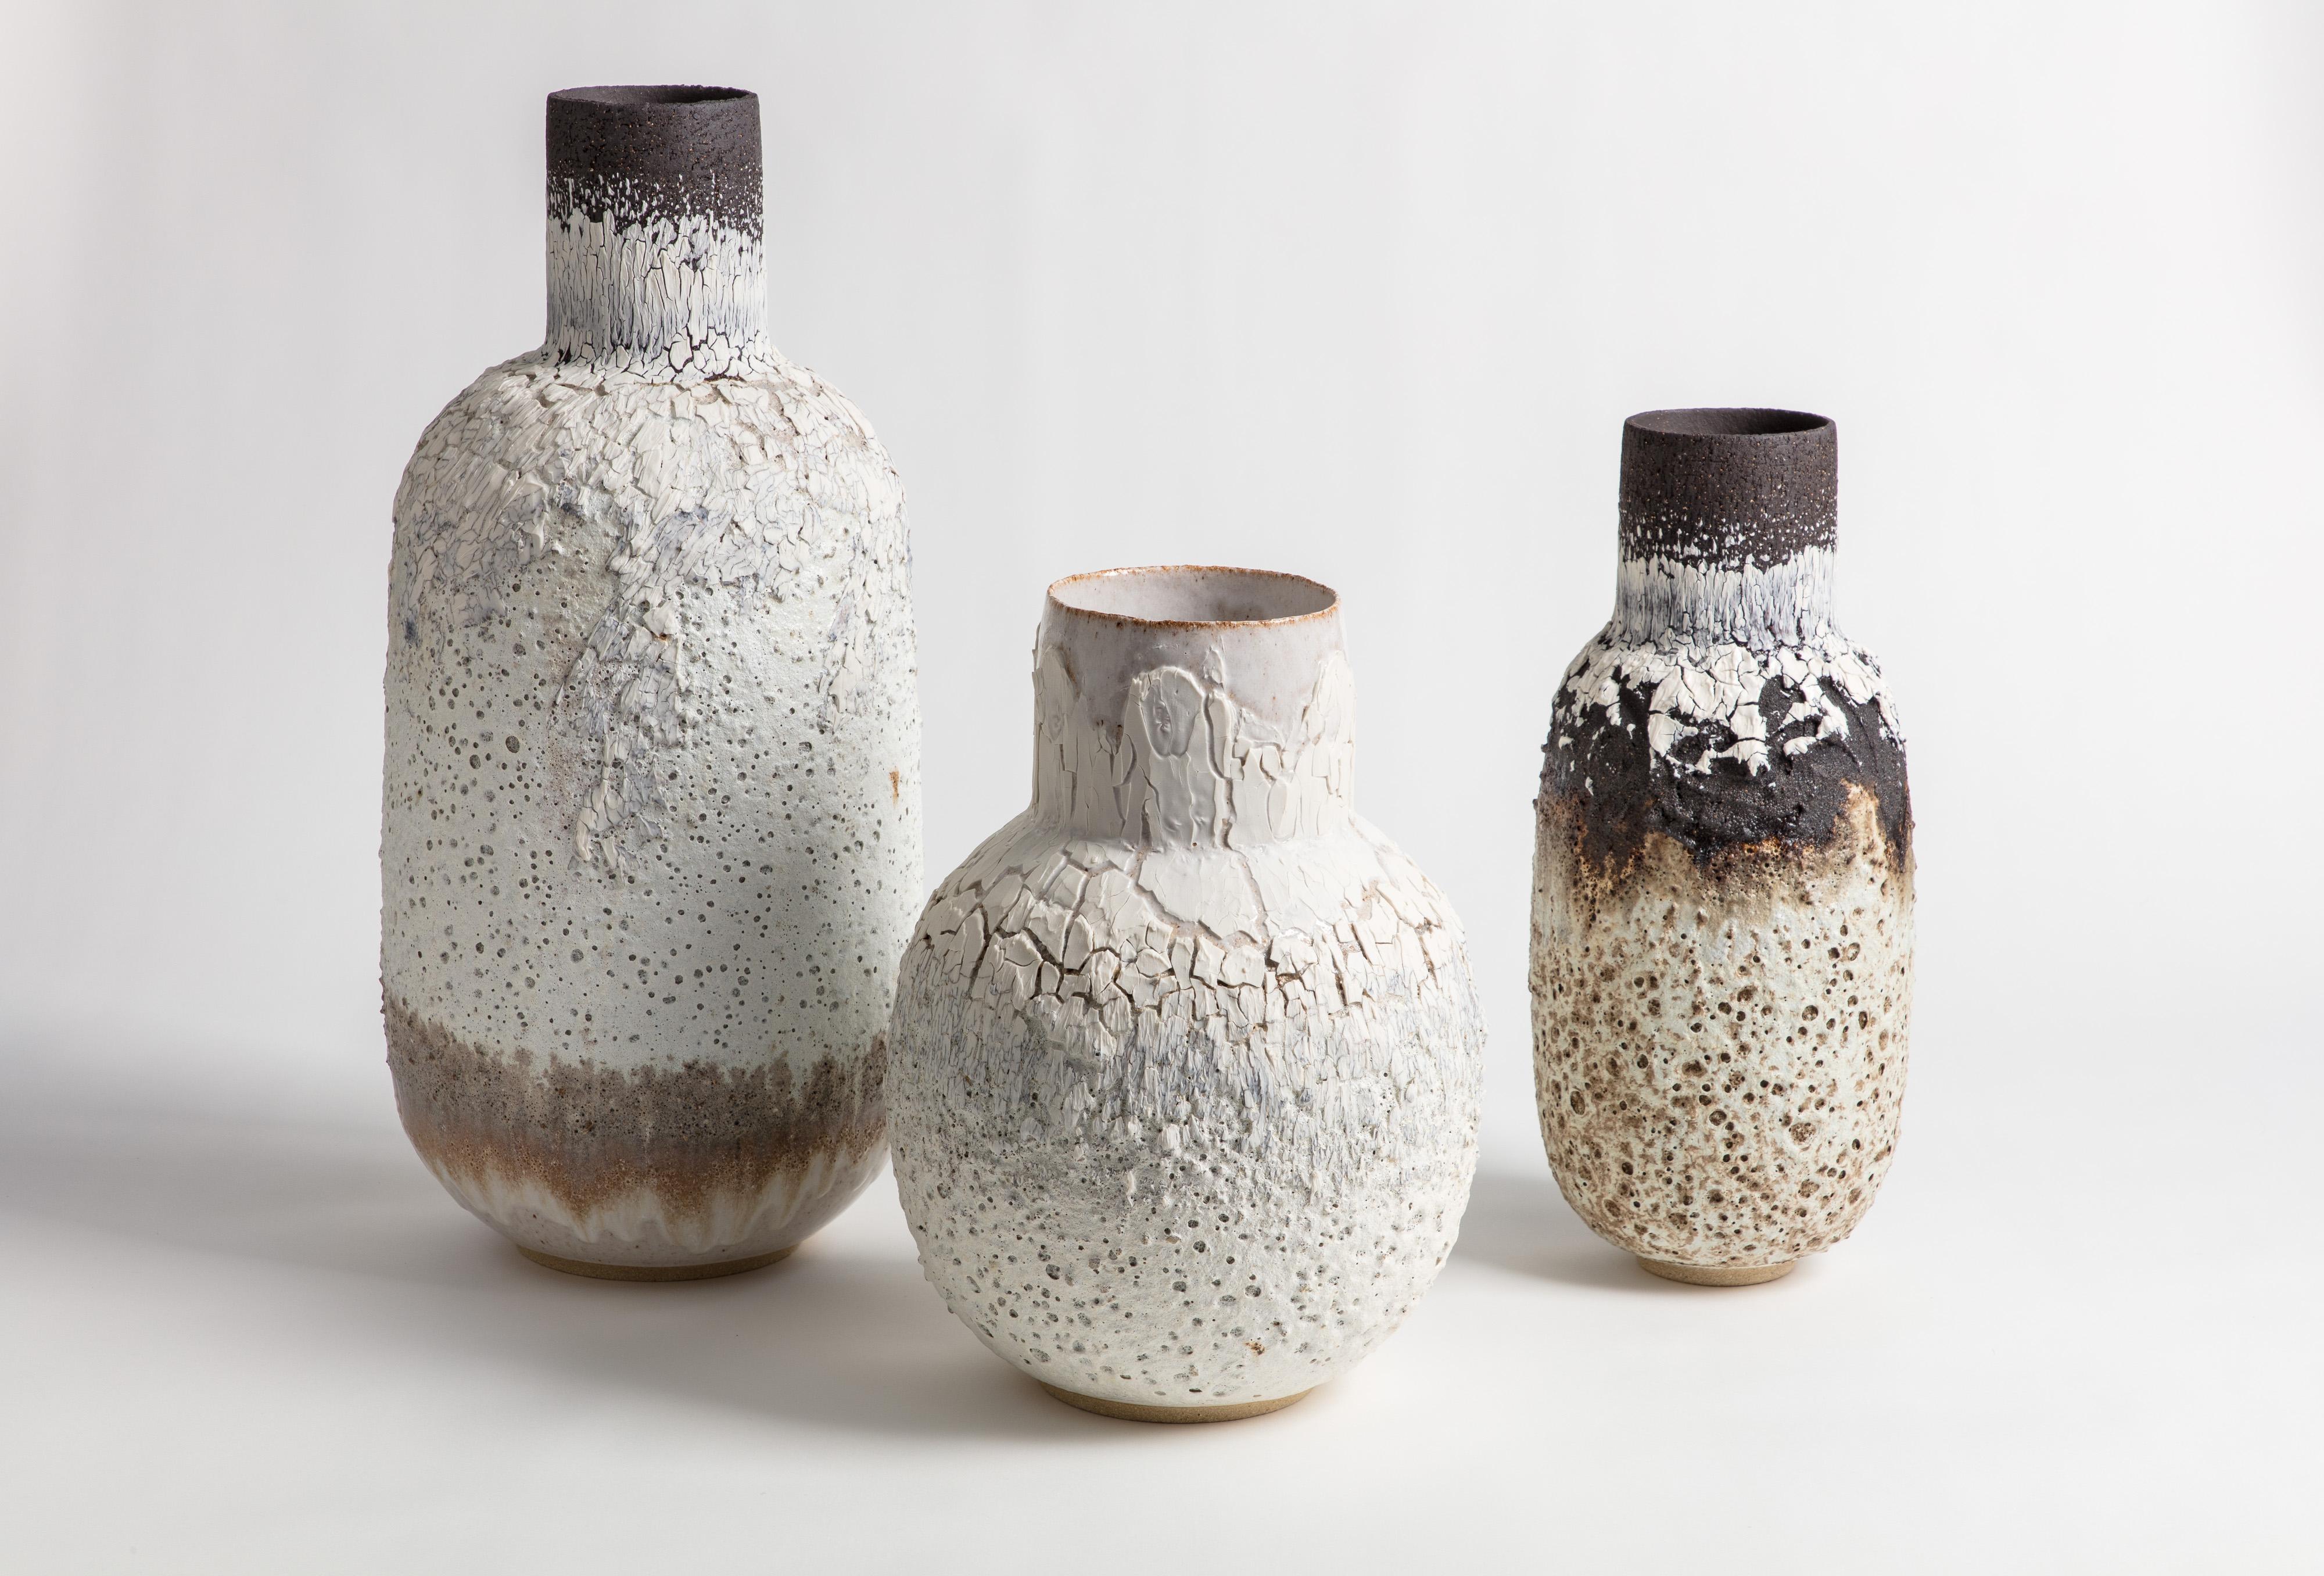 This medium heavily textured volcanic bottle shaped vessel with black and white glaze and markings. Made from black textured stoneware clay and porcelain engobe with the addition of lava stone.

Inspiration for the piece comes from the clay itself